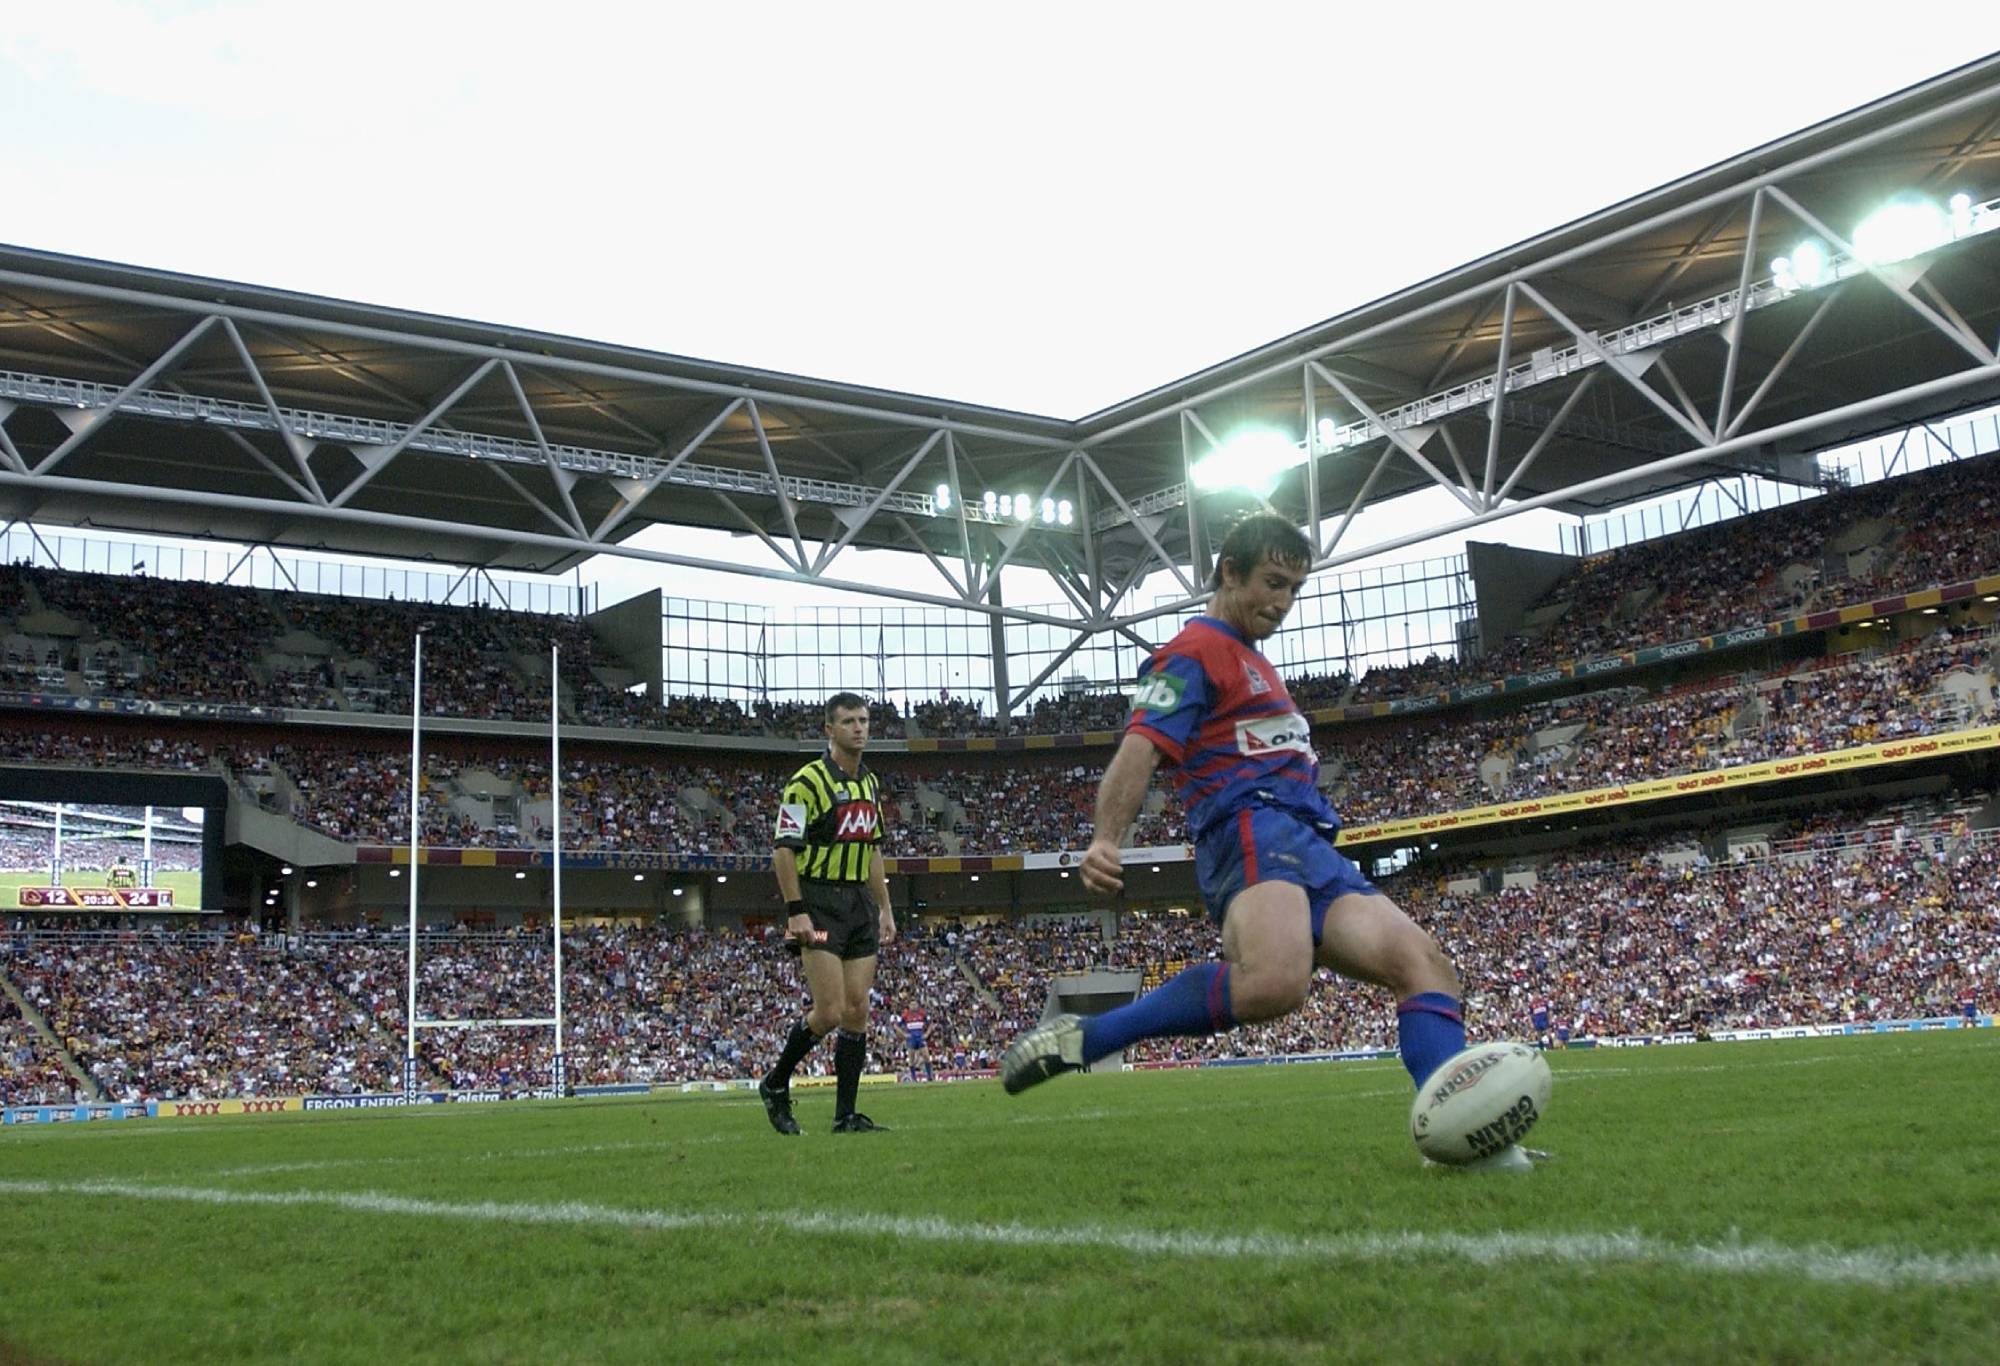 BRISBANE - JUNE 1:  Andrew Johns #7 of Newcastle kicks a goal against Brisbane during the NRL round 12 match June 1, 2003 between the Brisbane Broncos and the Newcastle Knights at Suncorp Stadium in Brisbane, Australia. (Photo by Darren England/Getty Images)